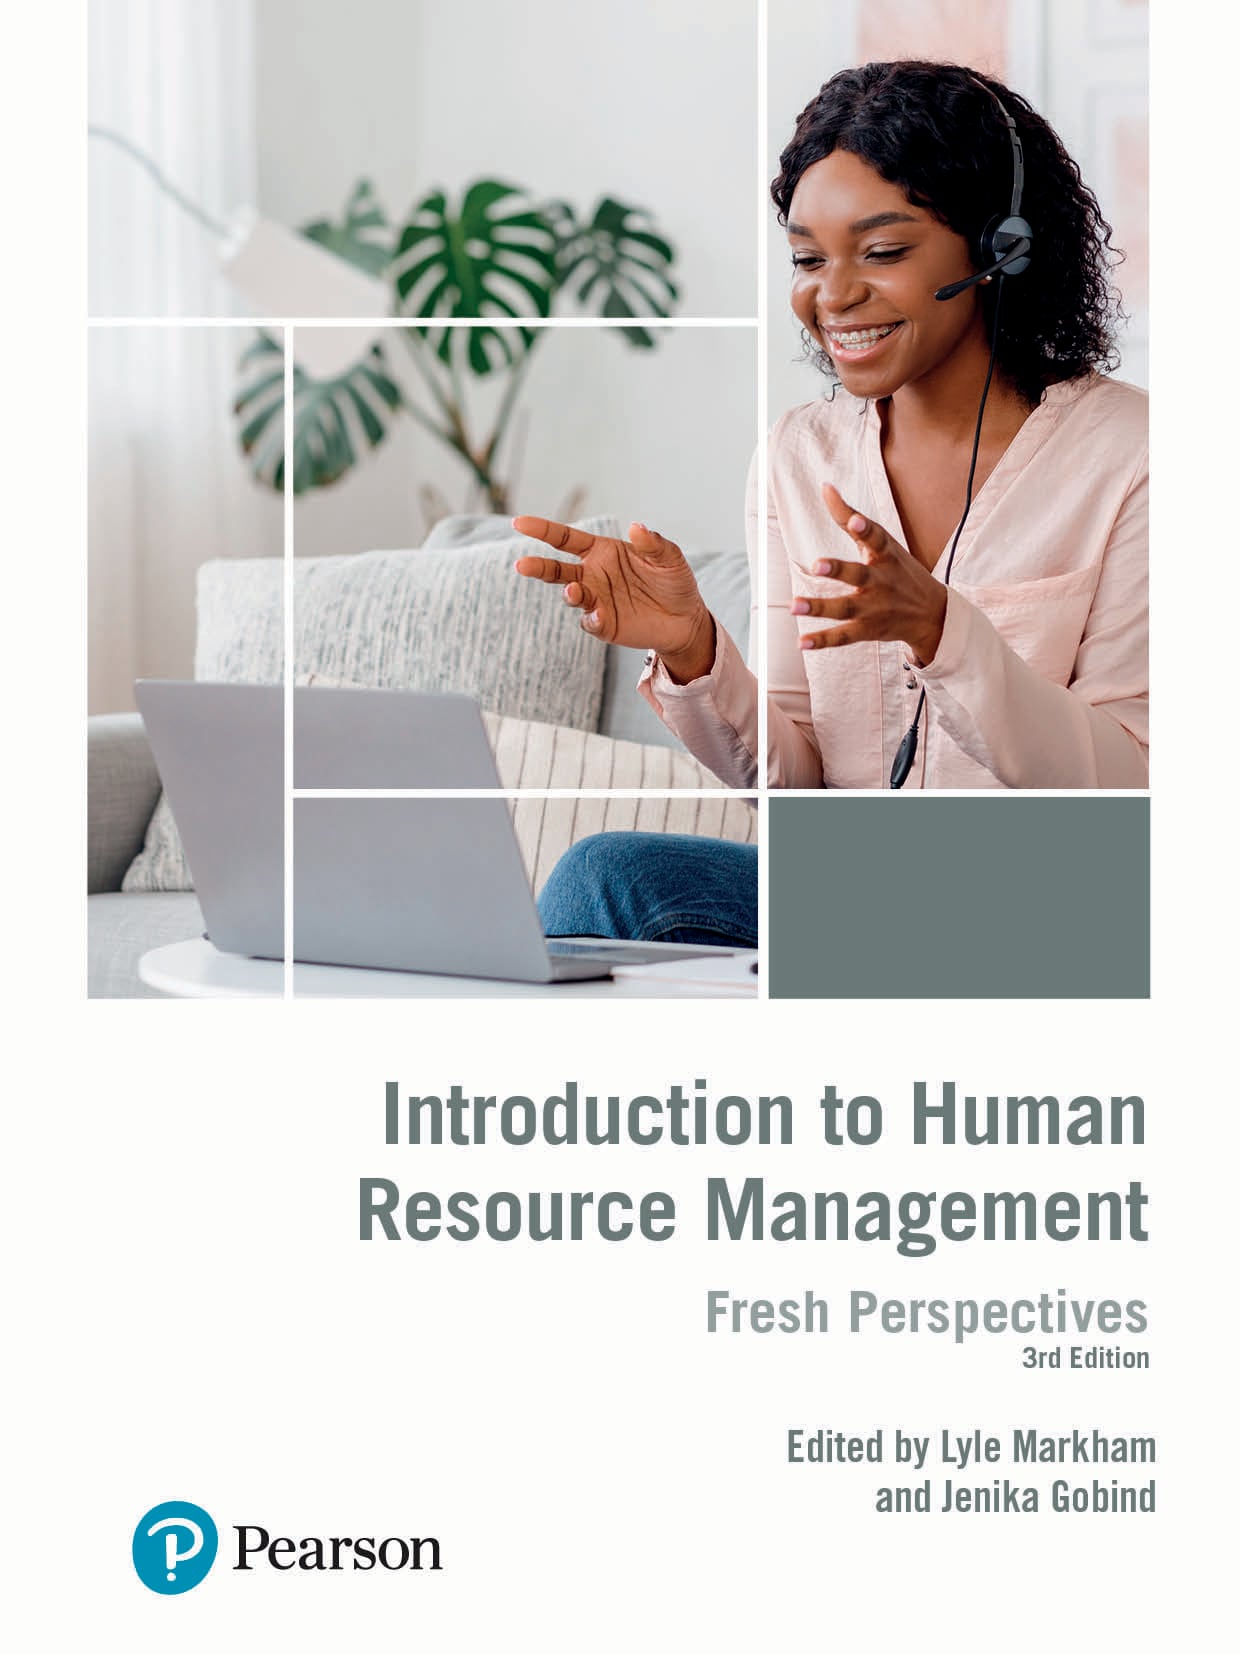 Intro to Human Resource Management